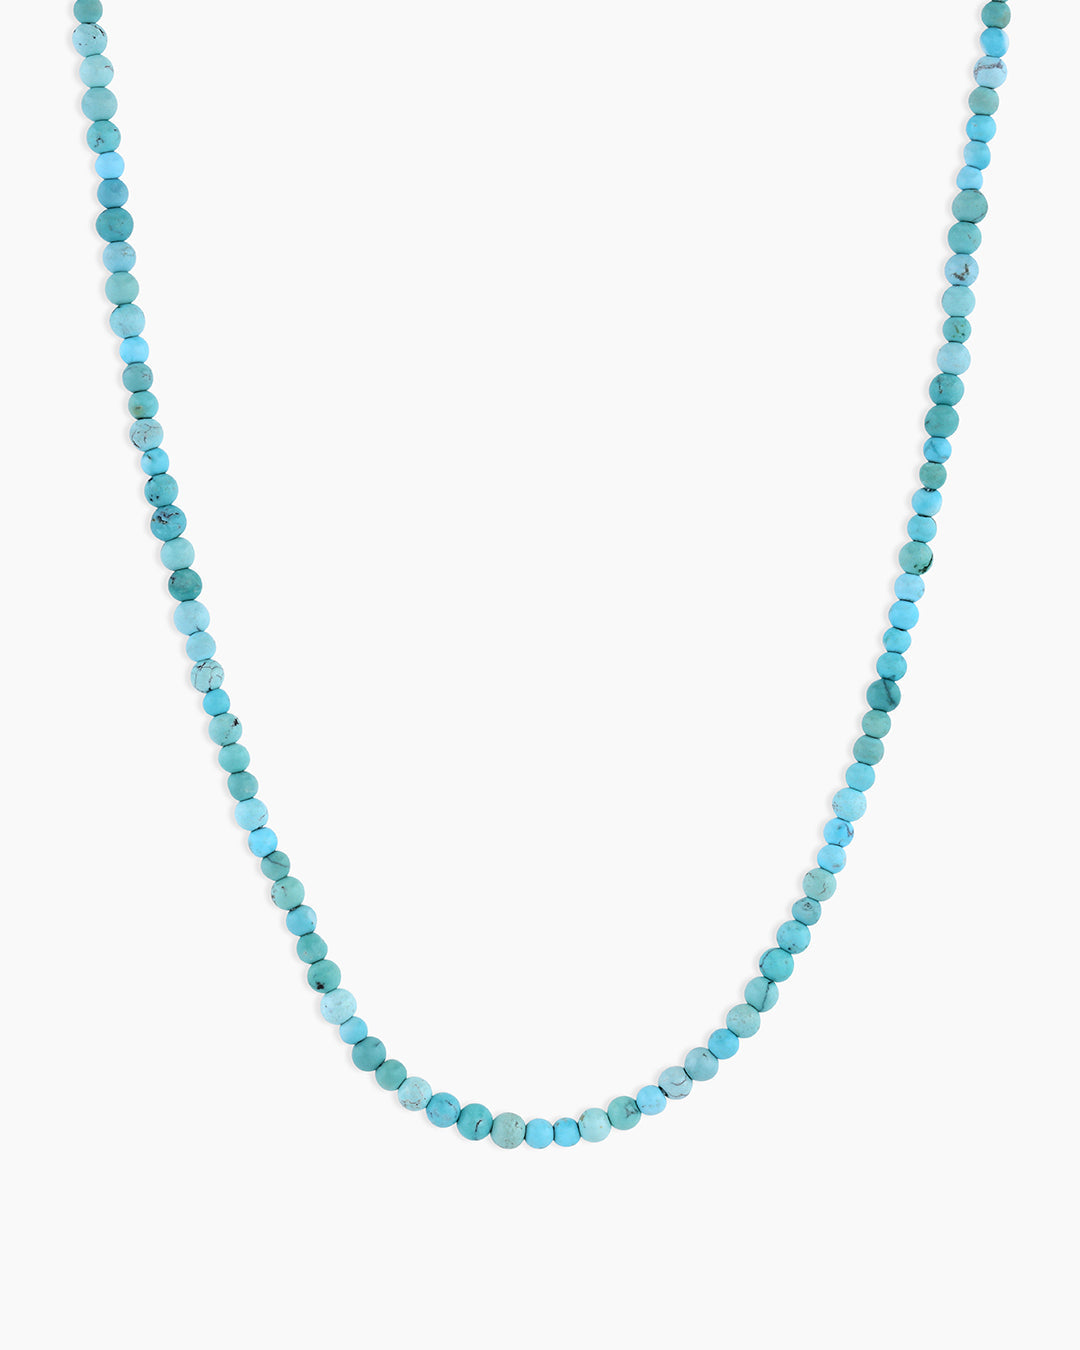 Shop Vivid Natural Turquoise 18K Gold Chain for Women | Gehna